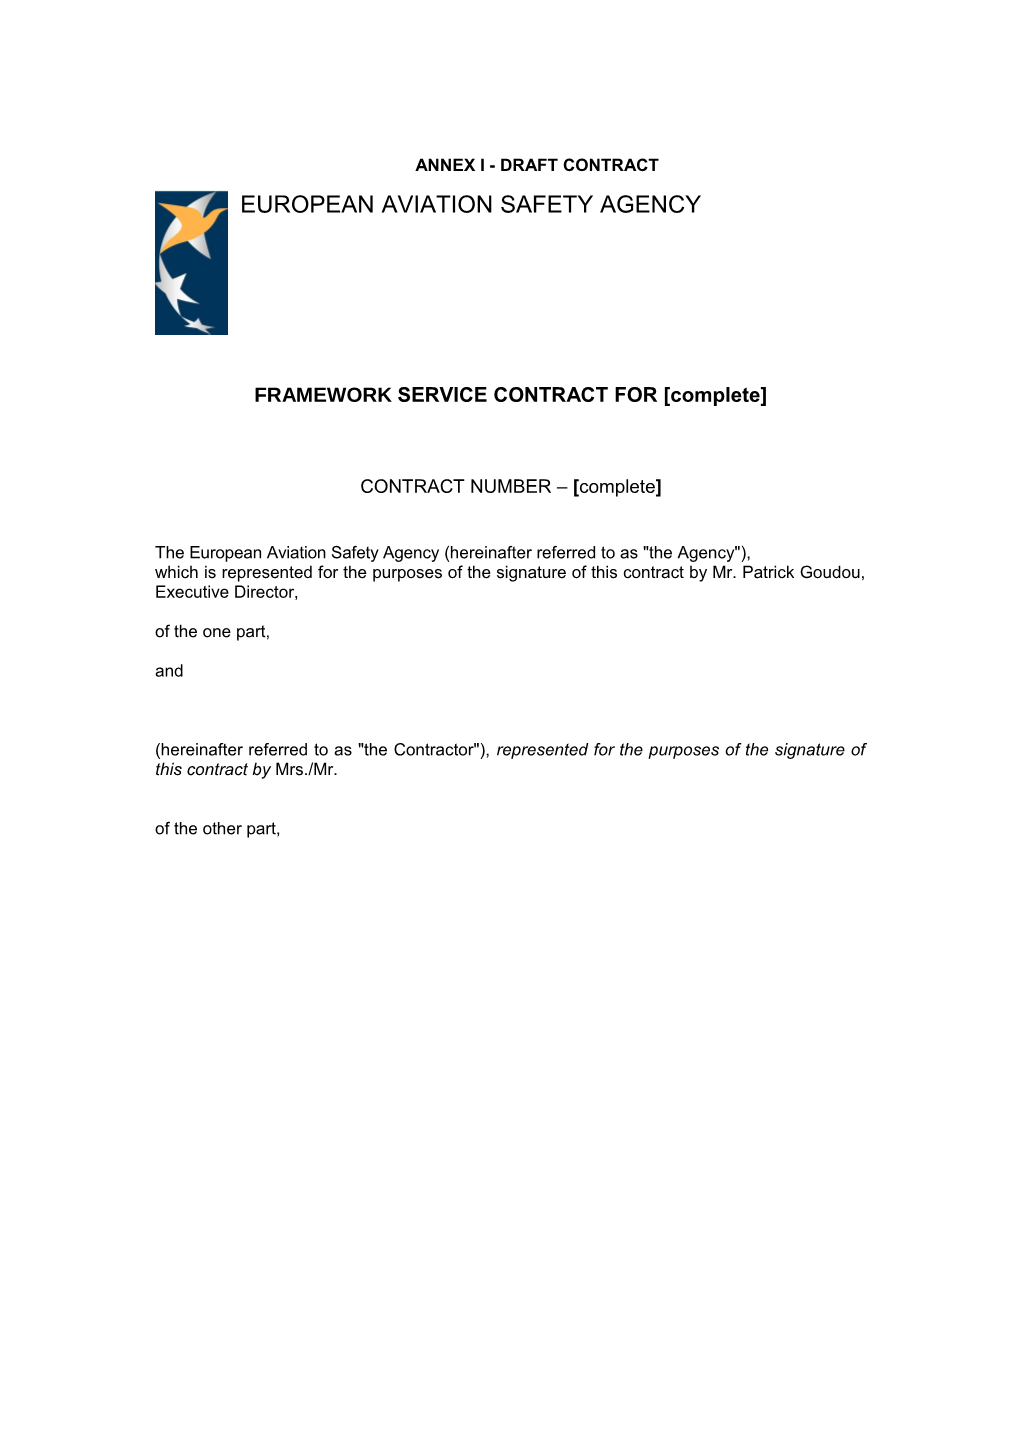 Annex I - Draft Contract